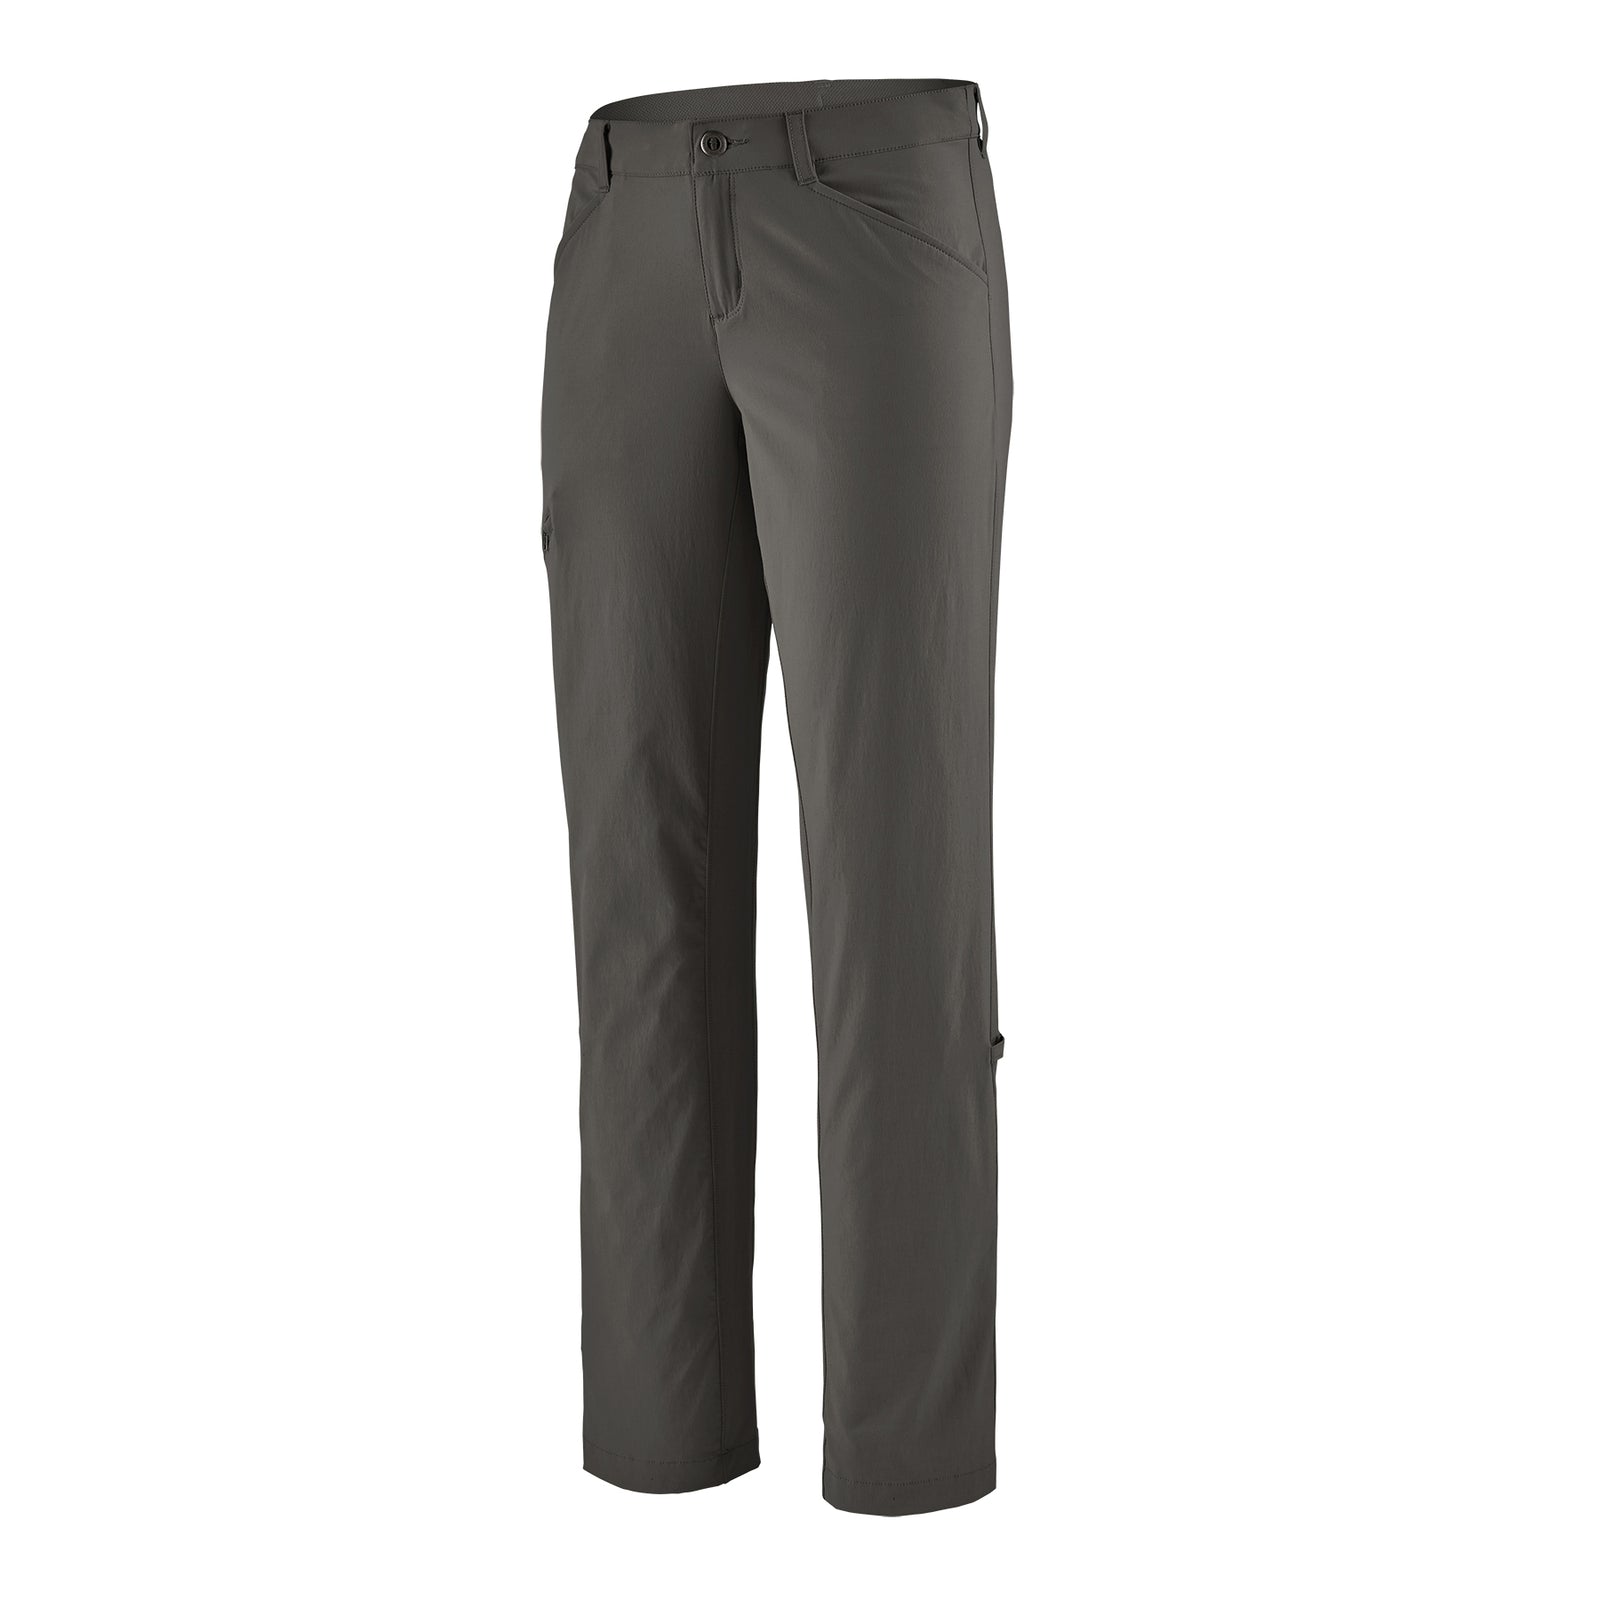 patagonia womens quandry pants in forge grey, three quarter view